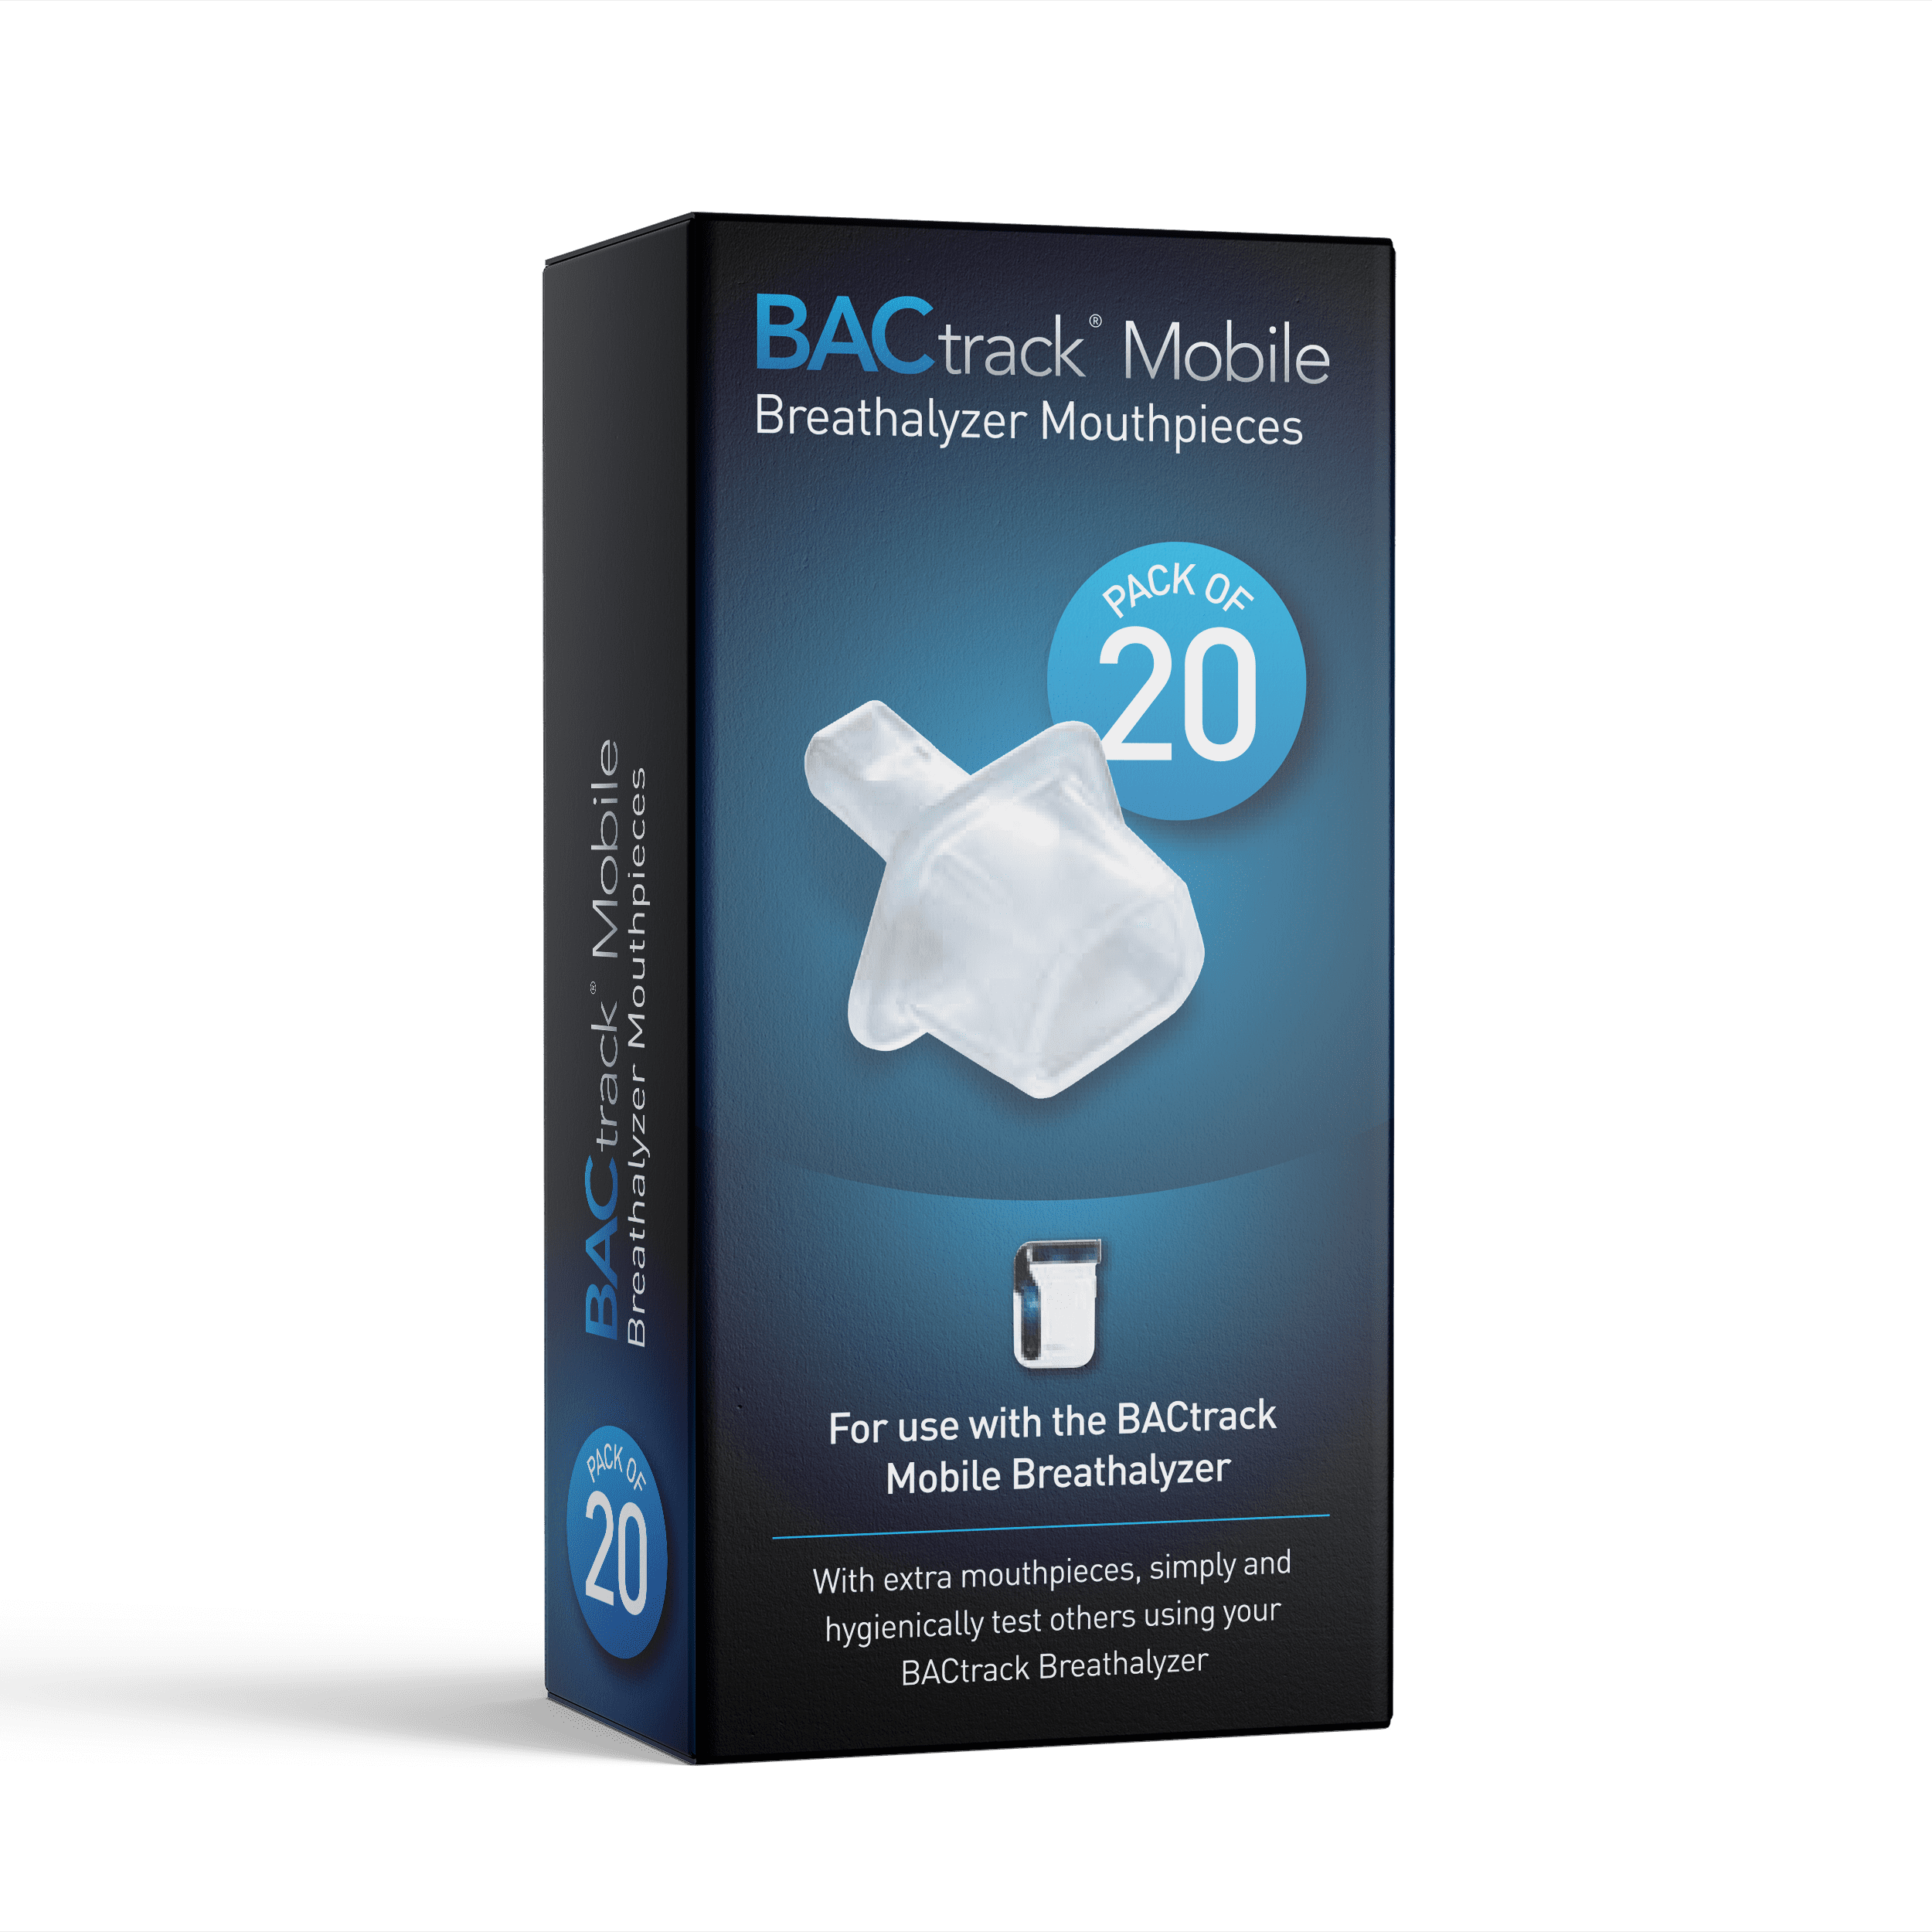 BACtrack Mobile Breathalyzer Mouthpieces 20 pack